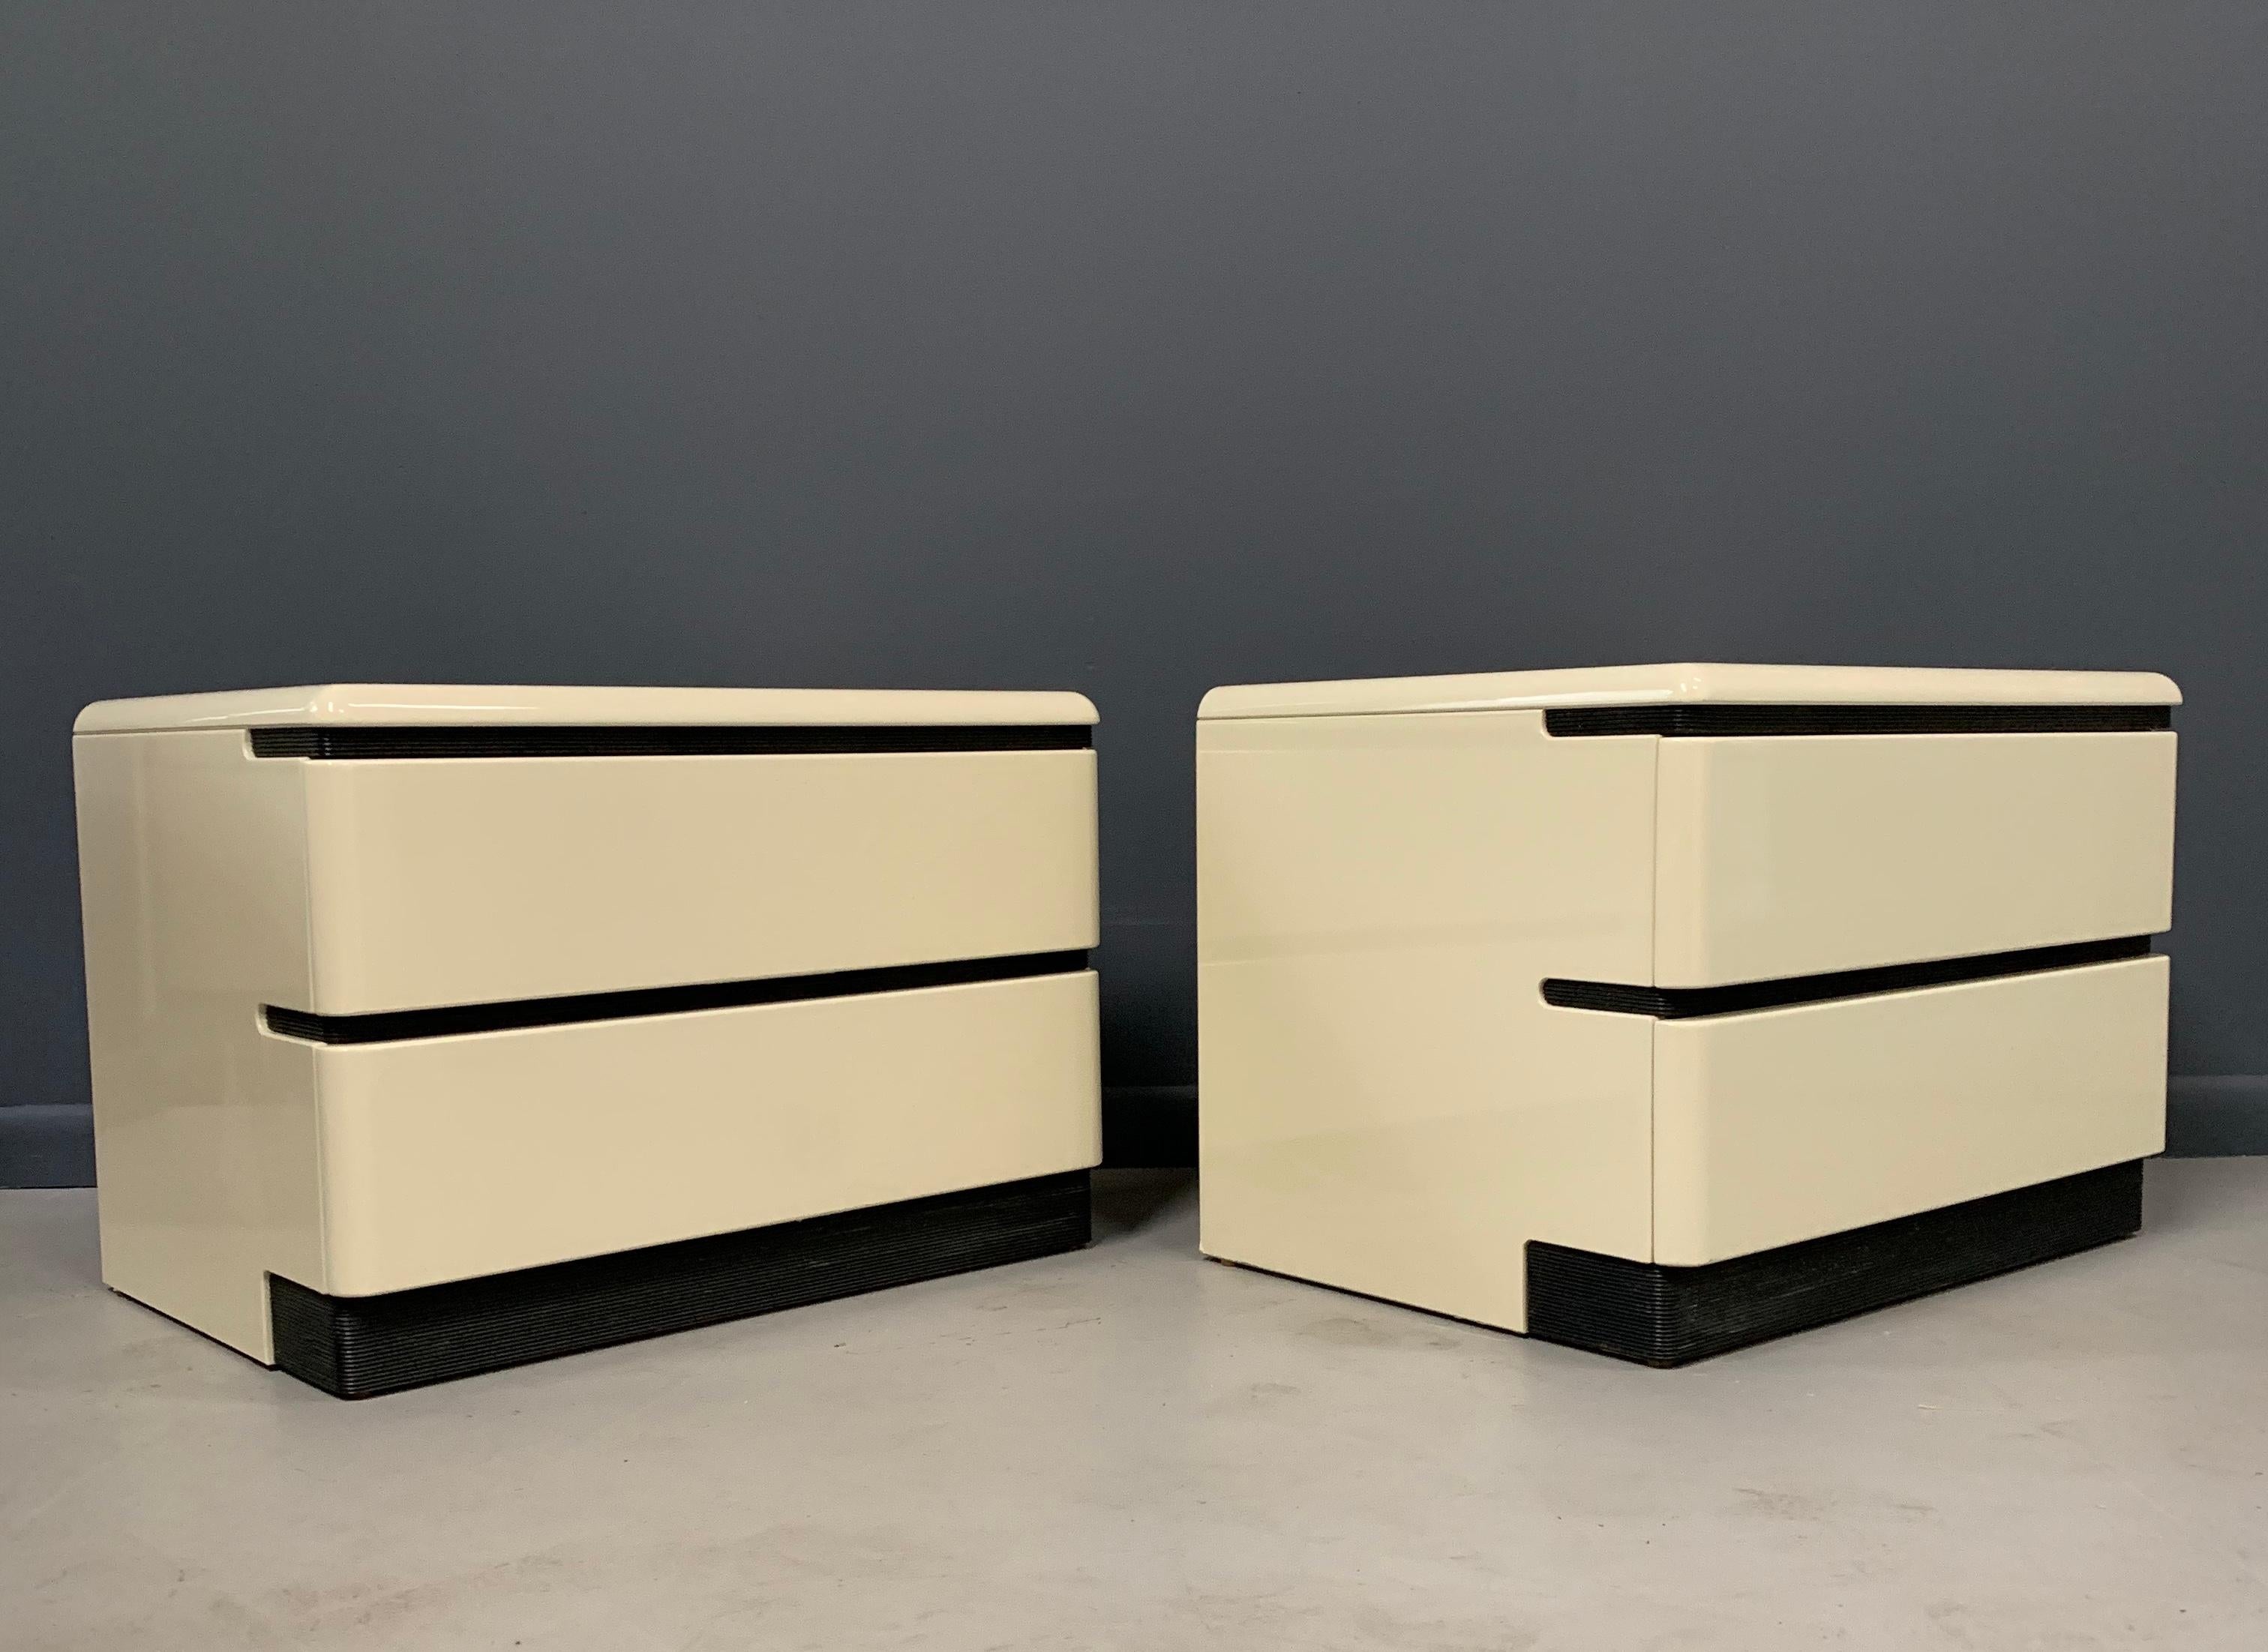 North American Postmodern 1980s Lacquered Nightstands by Roger Rougier